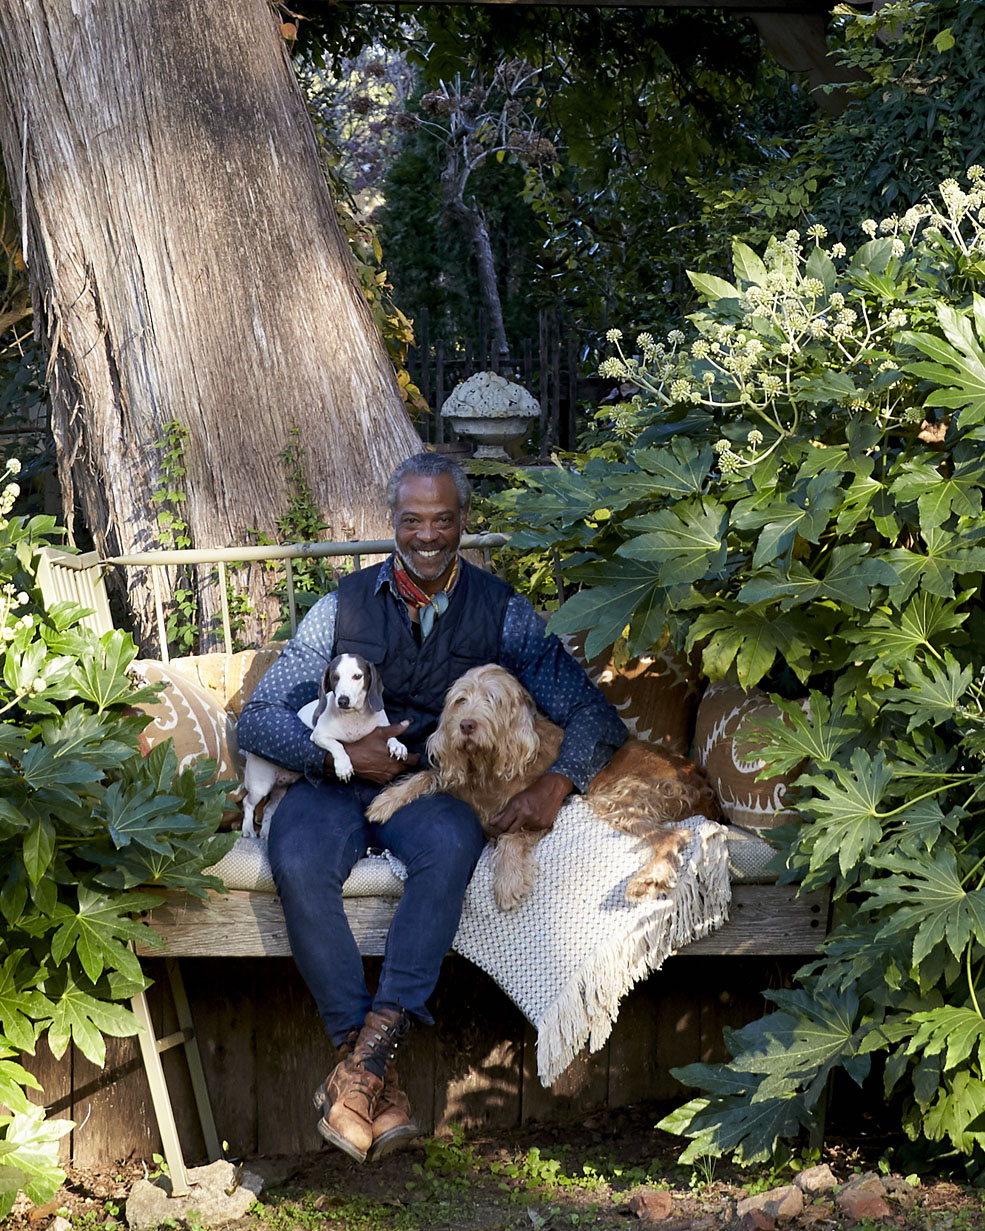 Keith Robinson with his dogs, sitting in the garden